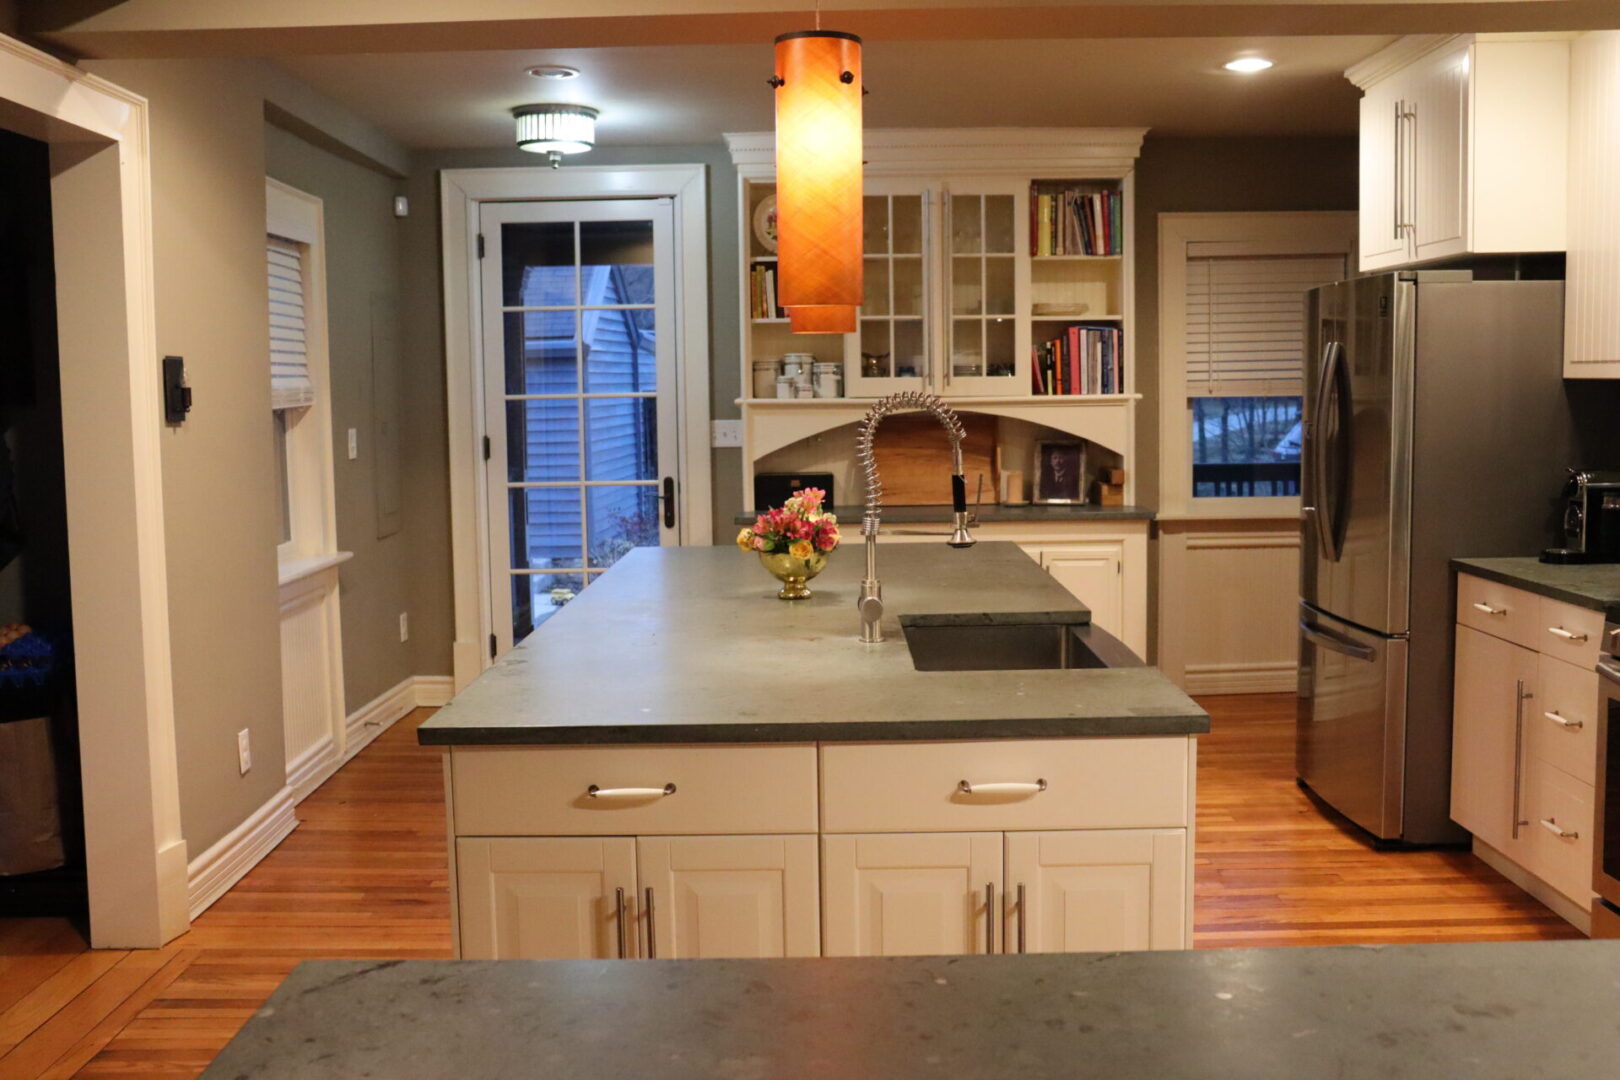 Grey-walled kitchen space with white cabinetry, silver appliances, and grey countertops